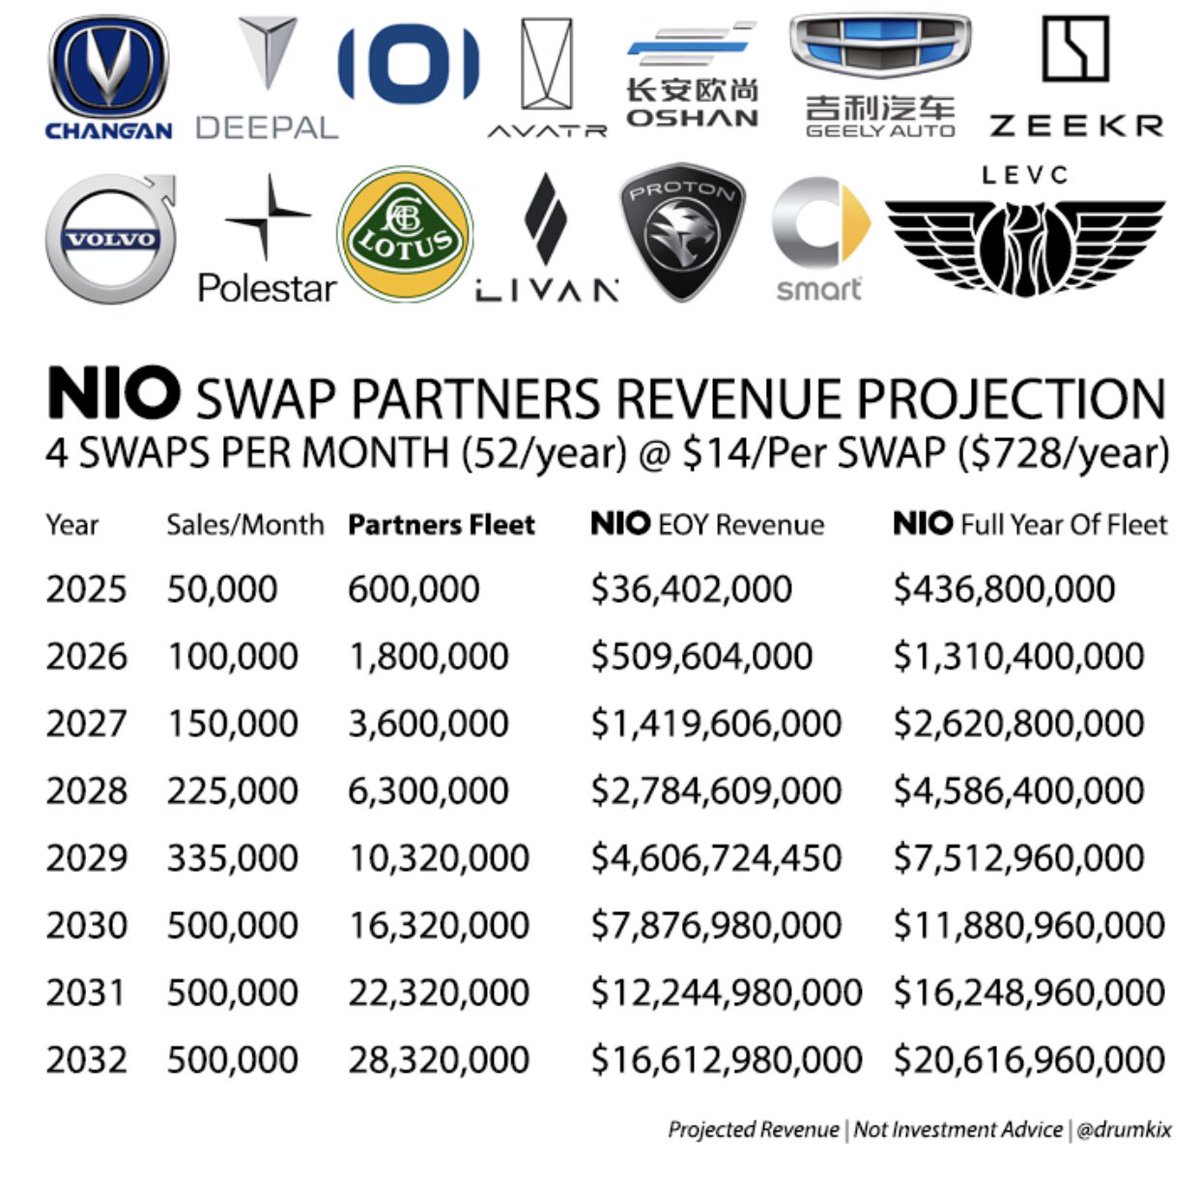 All the Analysts have got it wrong on BatterySwapping #NIO 16000 cars sold a month isn't much but people forget about d baas subscription. 383k cars paying 138.41 per month for baas 
That's a lot of subscription revenue Almost 60k swaps per day #MotleyFool #GoldmanSachs #JPMorgan